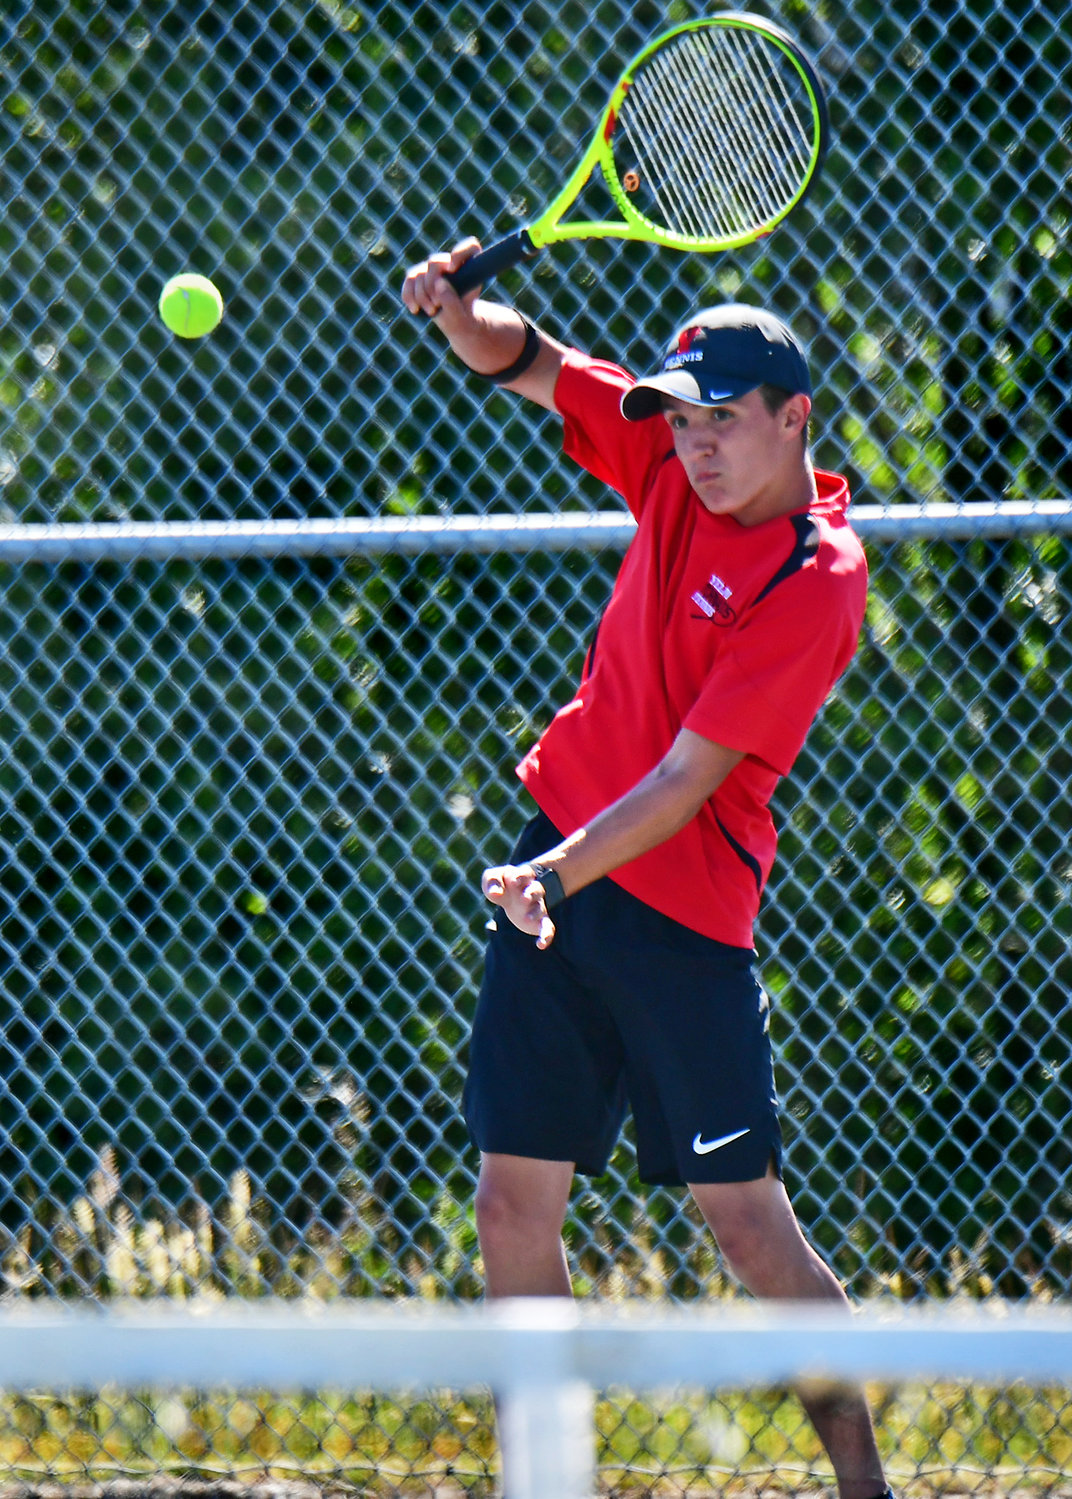 Hunter Cayford, one-half of the Yelm High School No. 1 boys doubles tennis duo, smacks a serve back to his doubles opponents from River Ridge High School on Wednesday, June 2, in Lacey.